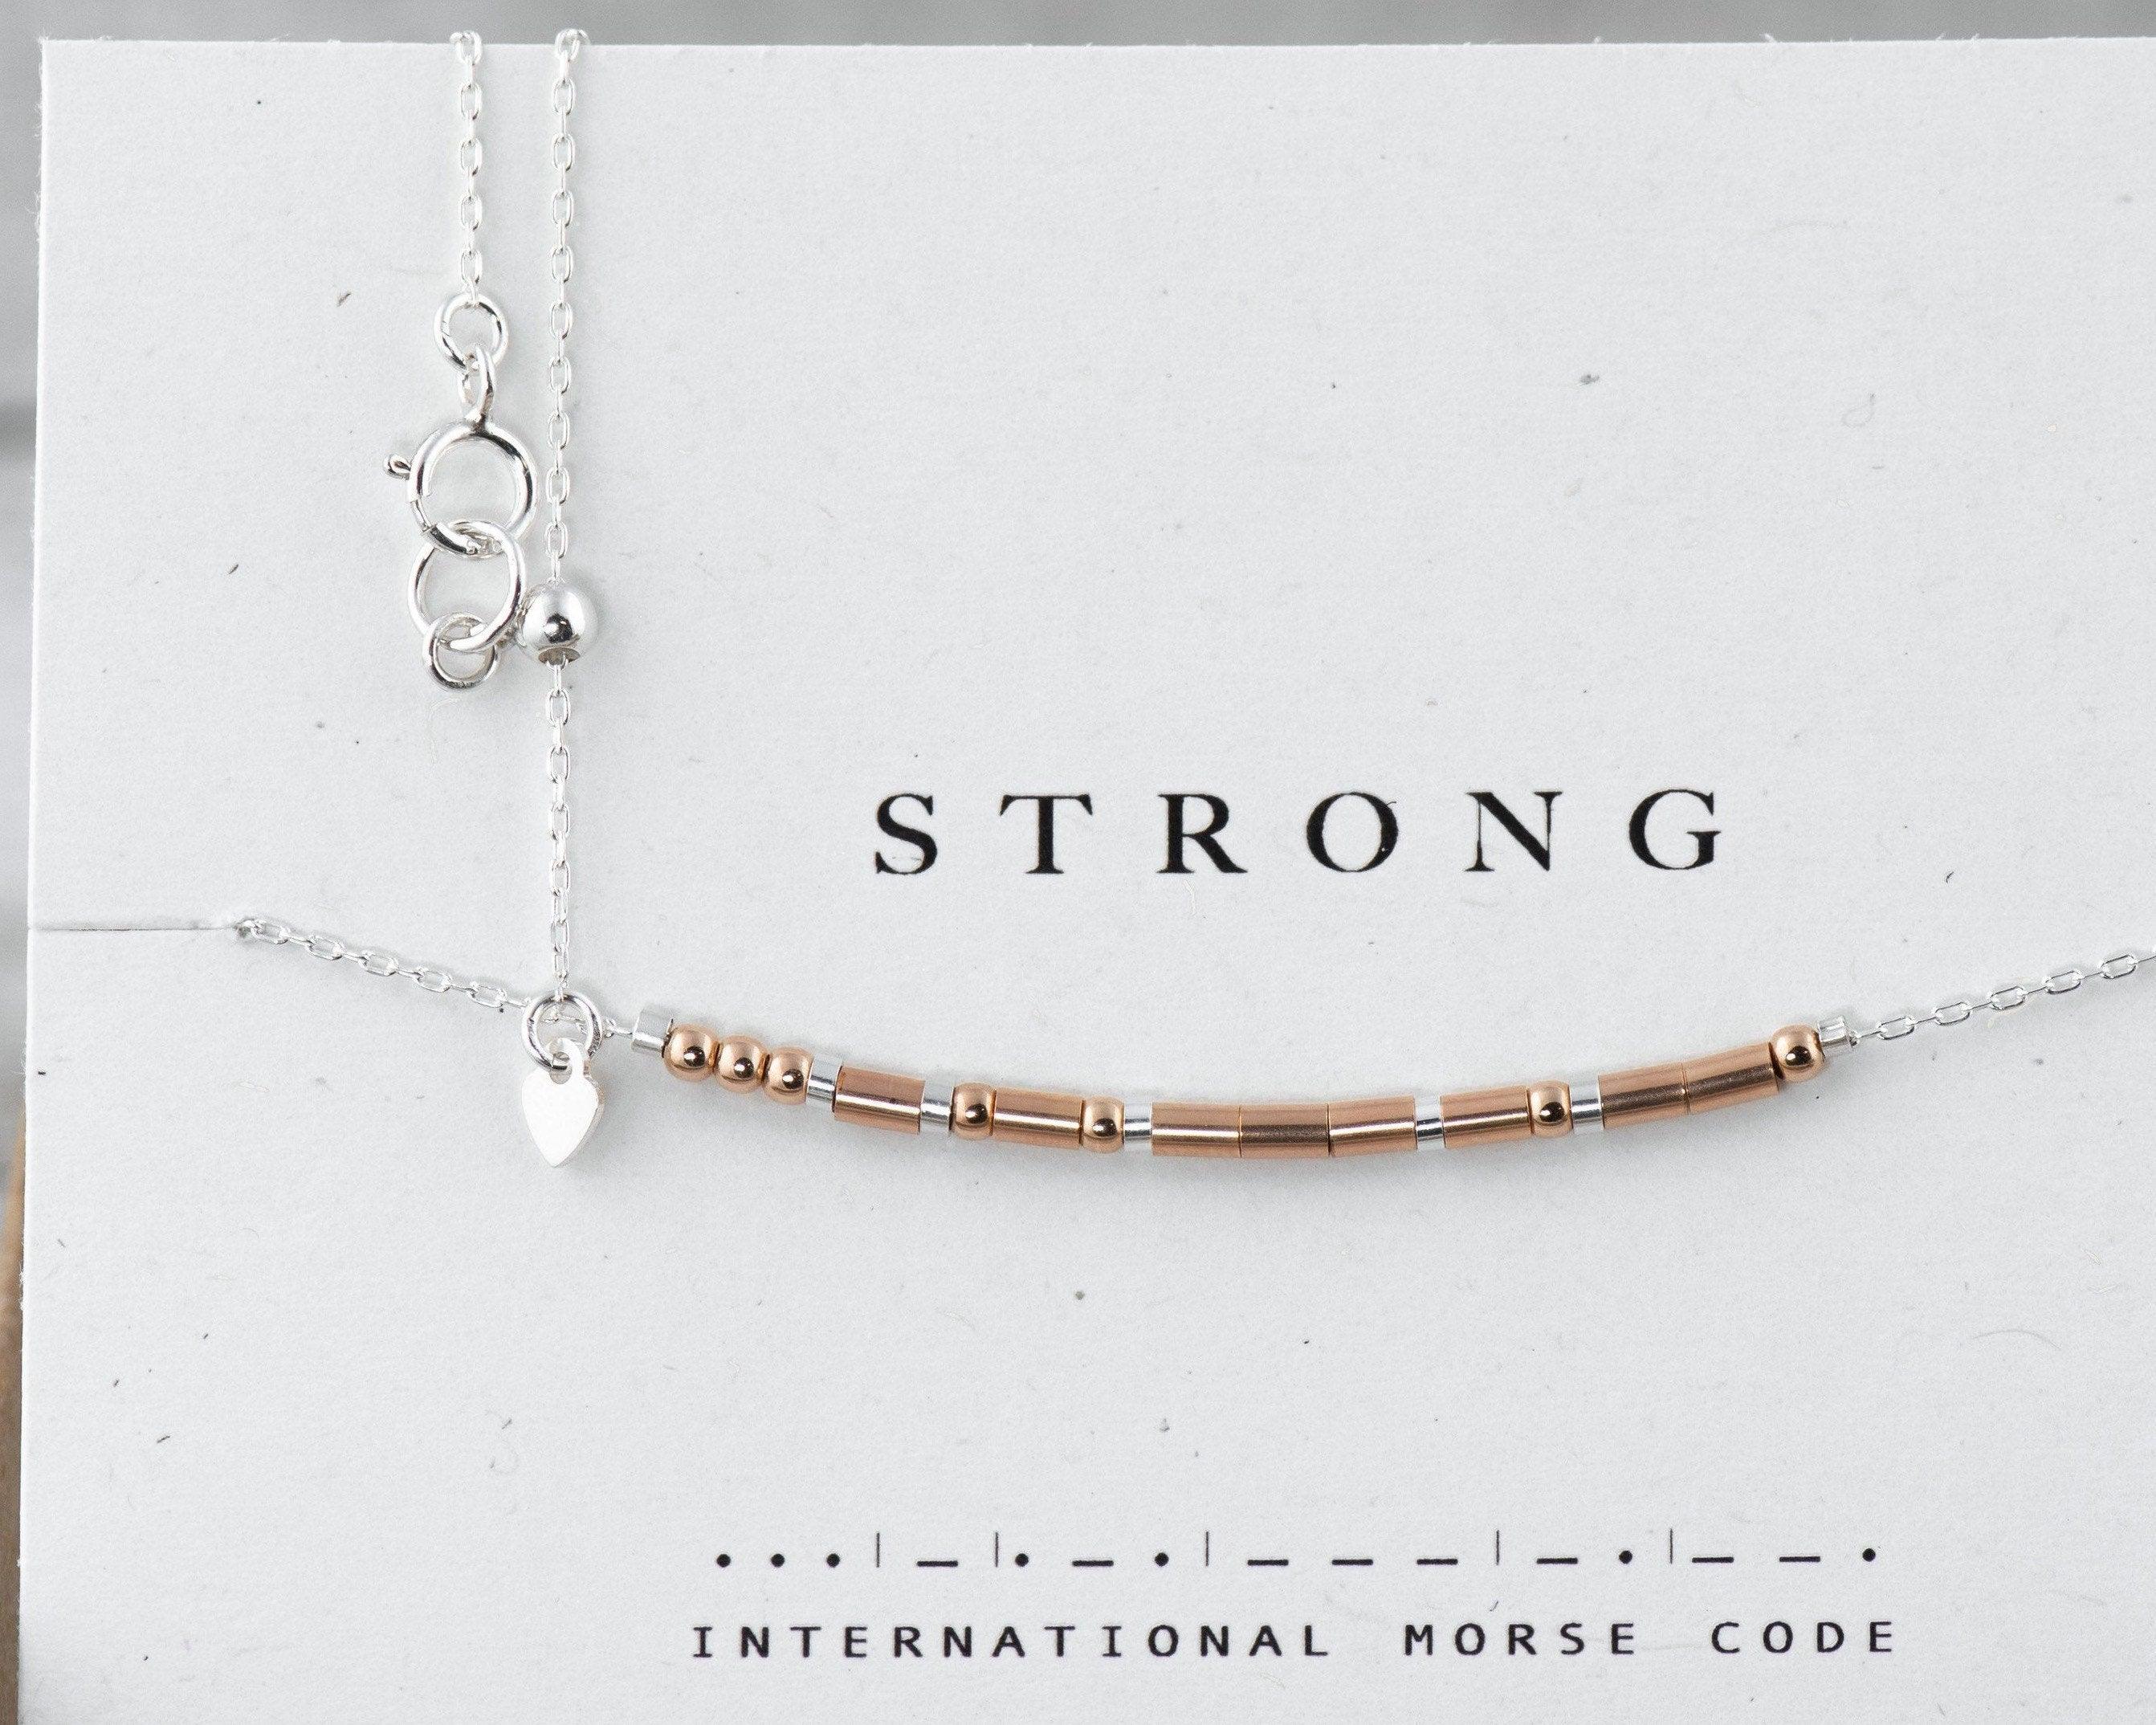 Strong Morse Code Necklace • AX.RS.RW.S1.S - Morse and Dainty